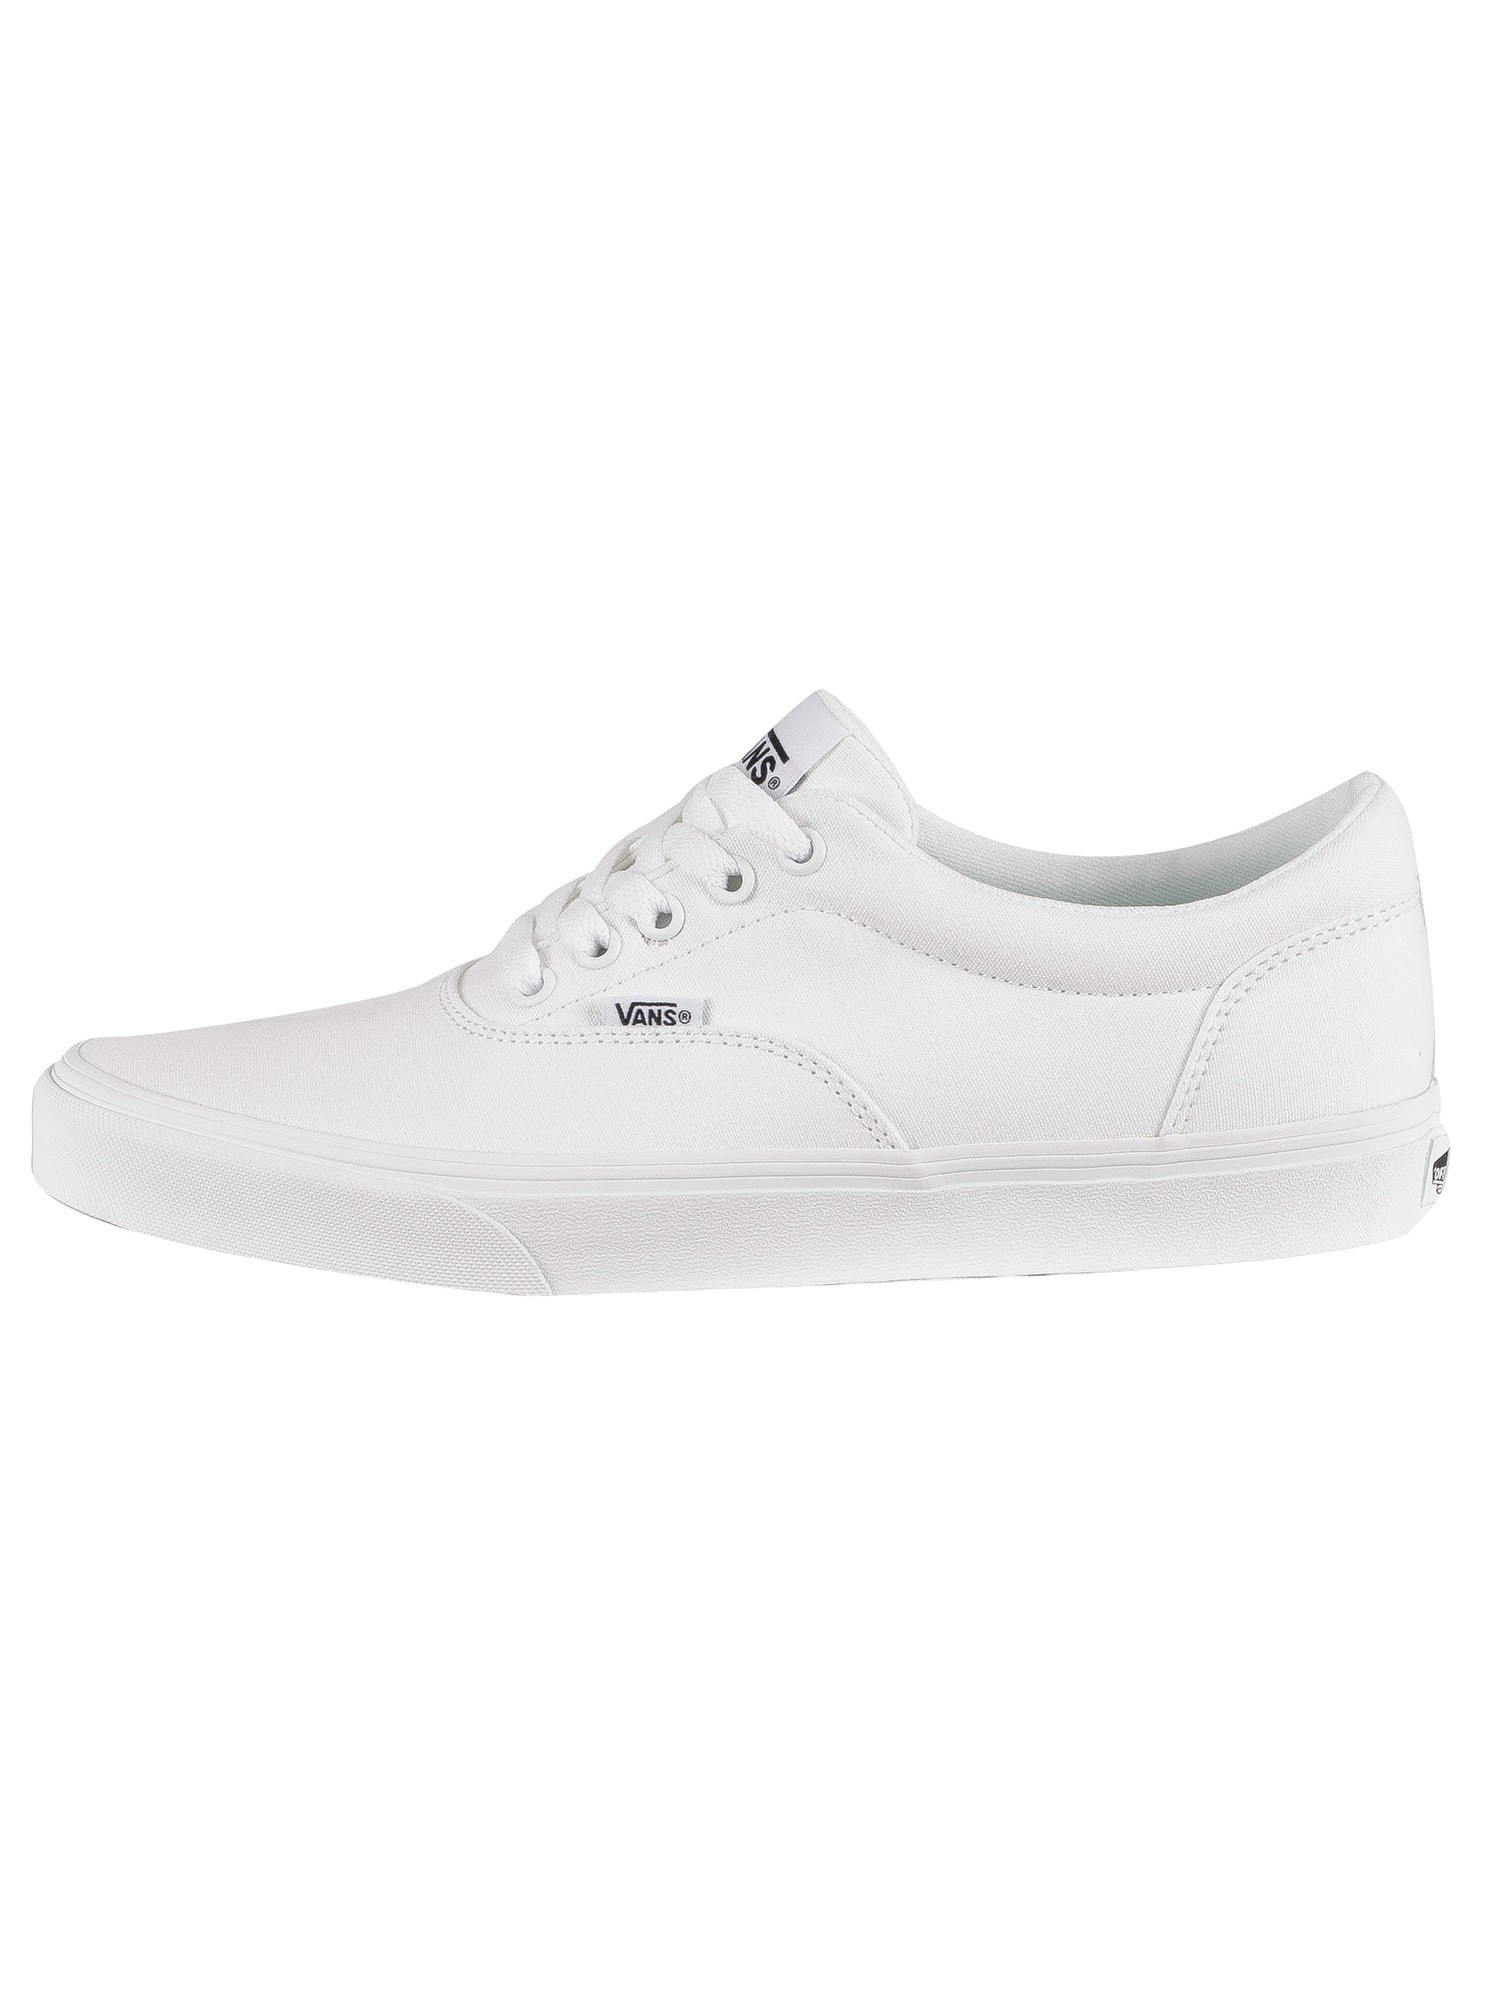 Vans Doheny Canvas Trainers - Triple 